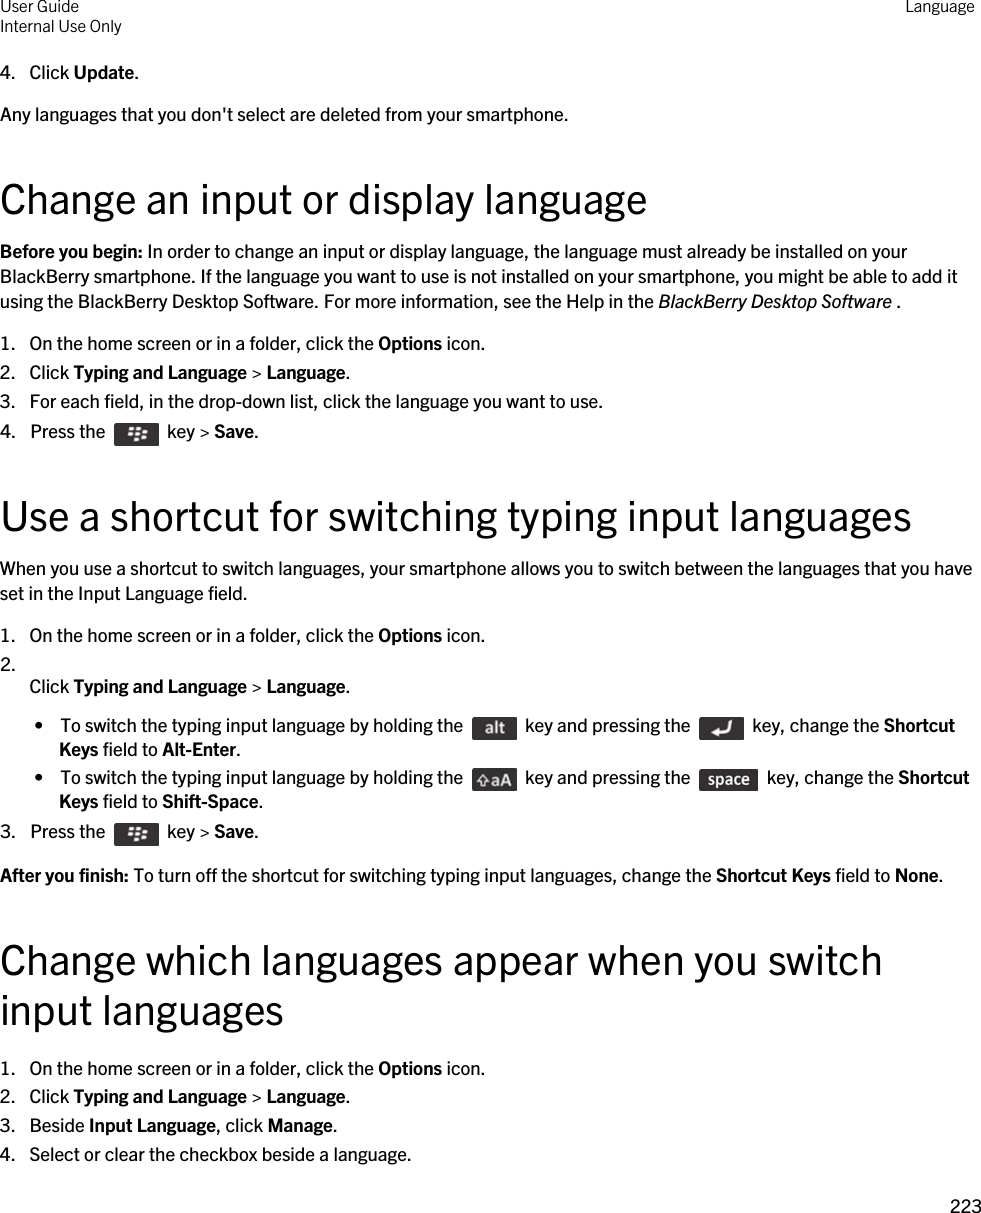 4. Click Update.Any languages that you don&apos;t select are deleted from your smartphone.Change an input or display languageBefore you begin: In order to change an input or display language, the language must already be installed on your BlackBerry smartphone. If the language you want to use is not installed on your smartphone, you might be able to add it using the BlackBerry Desktop Software. For more information, see the Help in the BlackBerry Desktop Software .1. On the home screen or in a folder, click the Options icon.2. Click Typing and Language &gt; Language.3. For each field, in the drop-down list, click the language you want to use.4.  Press the    key &gt; Save. Use a shortcut for switching typing input languagesWhen you use a shortcut to switch languages, your smartphone allows you to switch between the languages that you have set in the Input Language field.1. On the home screen or in a folder, click the Options icon.2.  Click Typing and Language &gt; Language. •  To switch the typing input language by holding the    key and pressing the    key, change the Shortcut Keys field to Alt-Enter. •  To switch the typing input language by holding the    key and pressing the    key, change the Shortcut Keys field to Shift-Space.3.  Press the    key &gt; Save. After you finish: To turn off the shortcut for switching typing input languages, change the Shortcut Keys field to None.Change which languages appear when you switch input languages1. On the home screen or in a folder, click the Options icon.2. Click Typing and Language &gt; Language.3. Beside Input Language, click Manage.4. Select or clear the checkbox beside a language.User GuideInternal Use Only Language223 